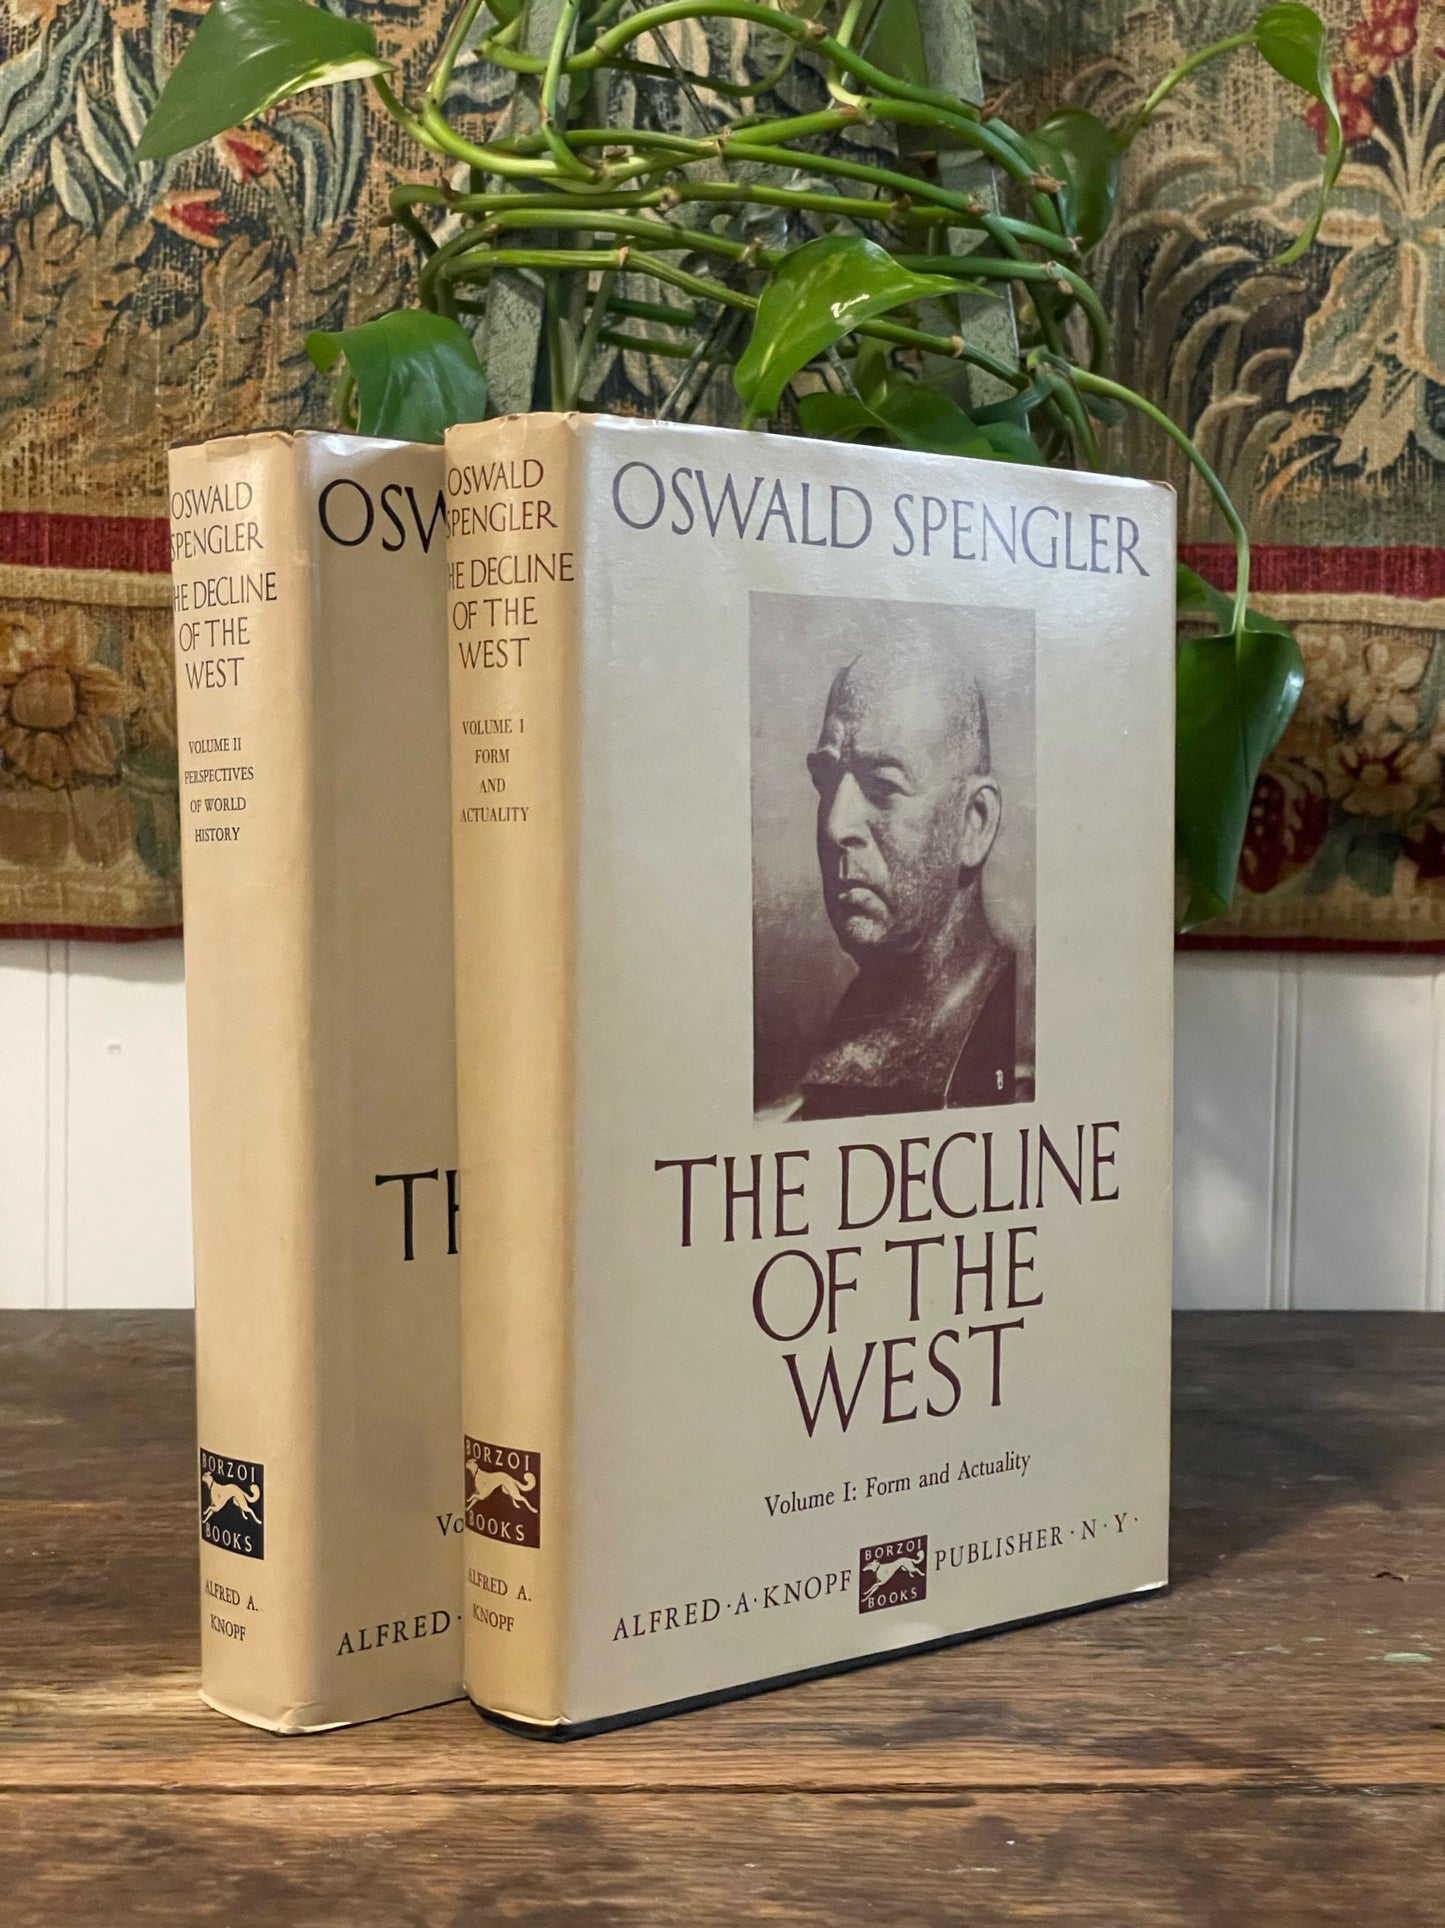 The Decline of The West by Oswald Spengler